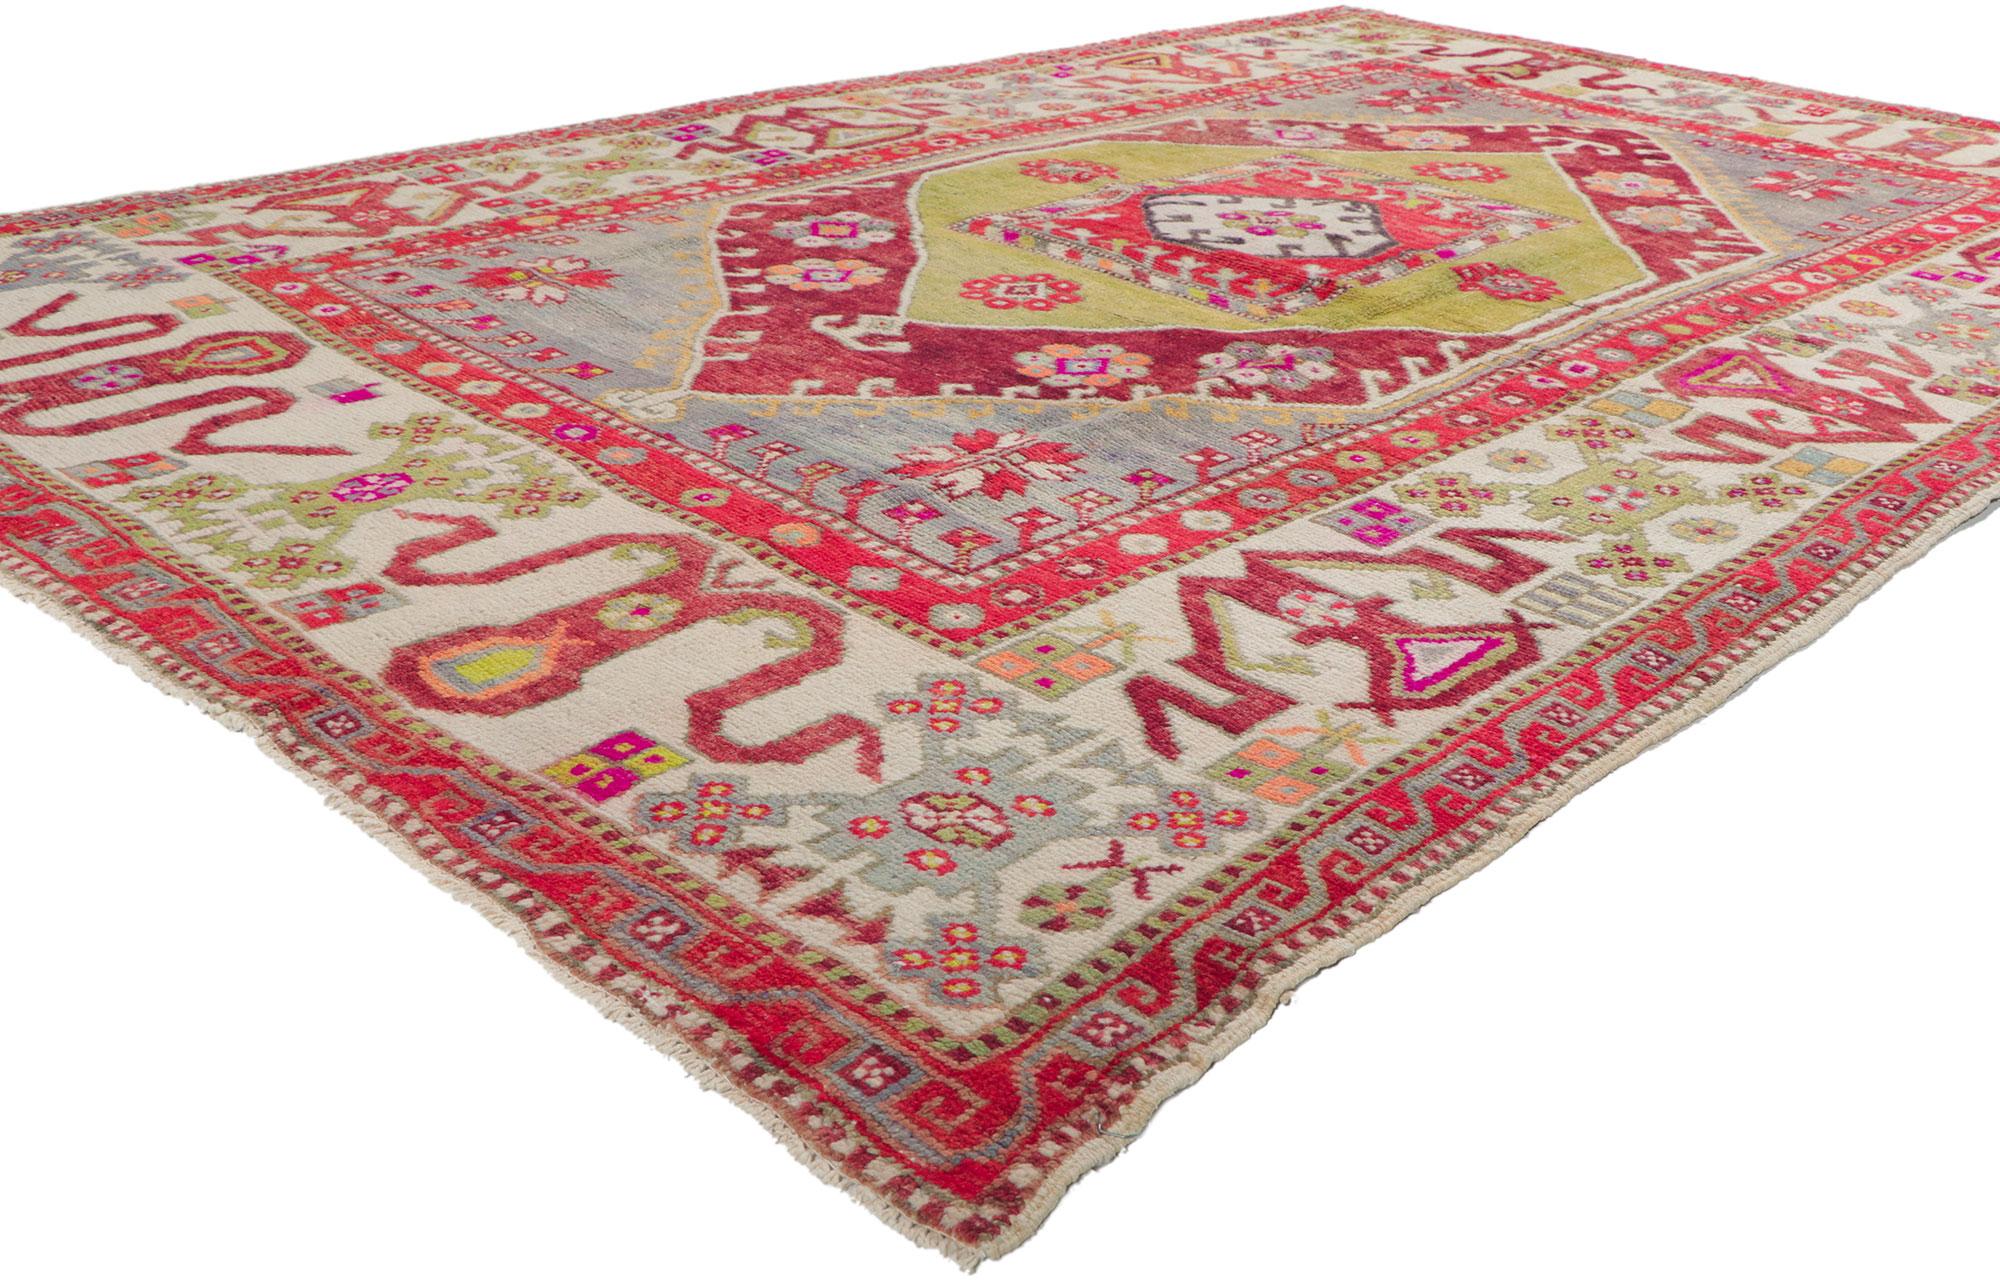 51784 Vintage Turkish Oushak rug, 05'10 x 08'11.
Showcasing a bold expressive design, incredible detail and texture, this hand knitted wool vintage Turkish Oushak rug is a captivating vision of woven beauty. The eye-catching medallion design and